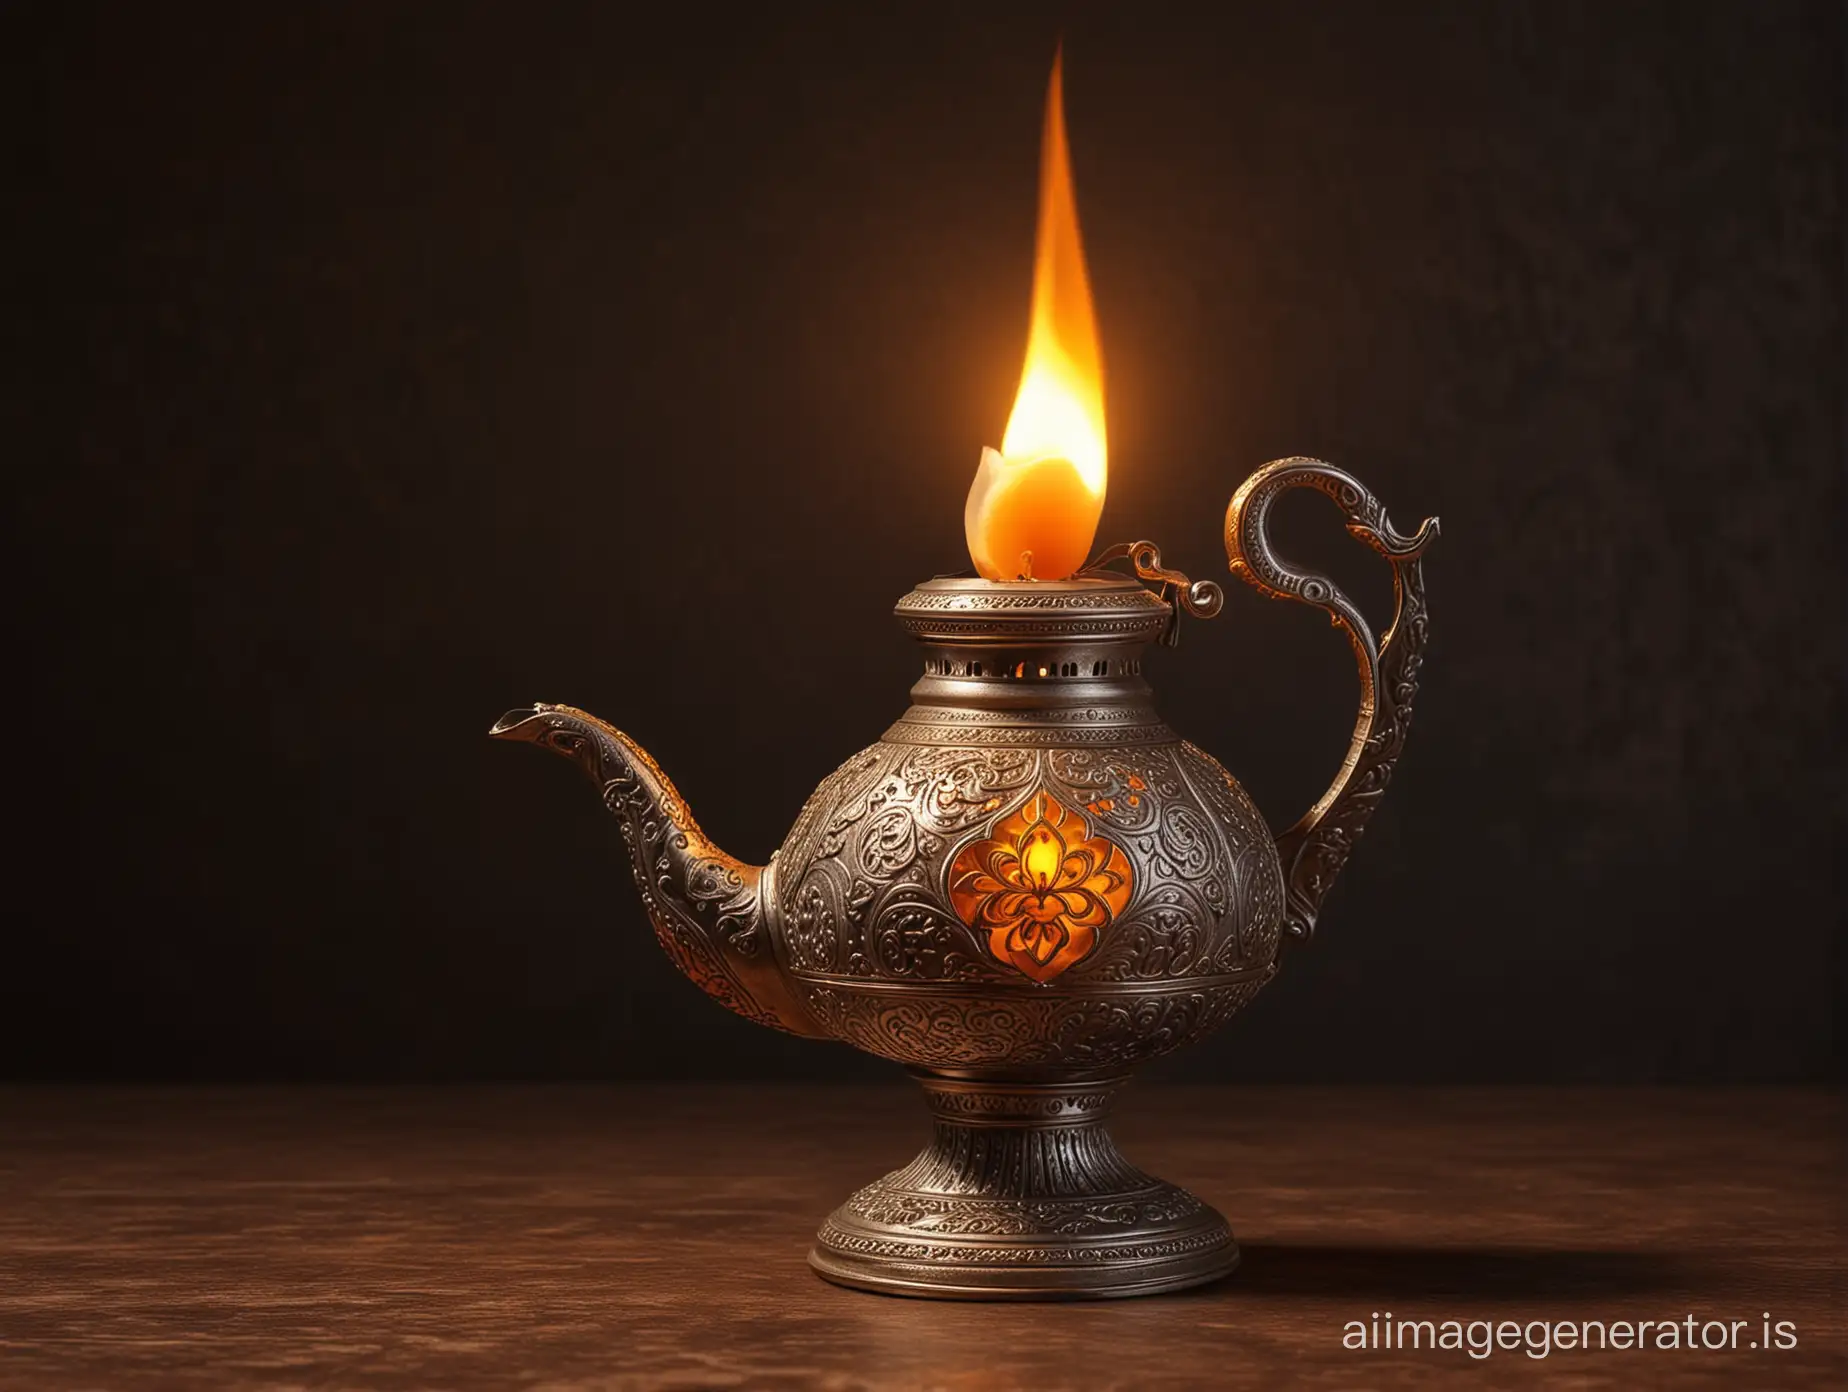 A silvery classic oil lamp burning with a yellow-orange flame. The lamp has fine details that suggest an ancient design, placed outdoors on a dark brown Ramadan background.